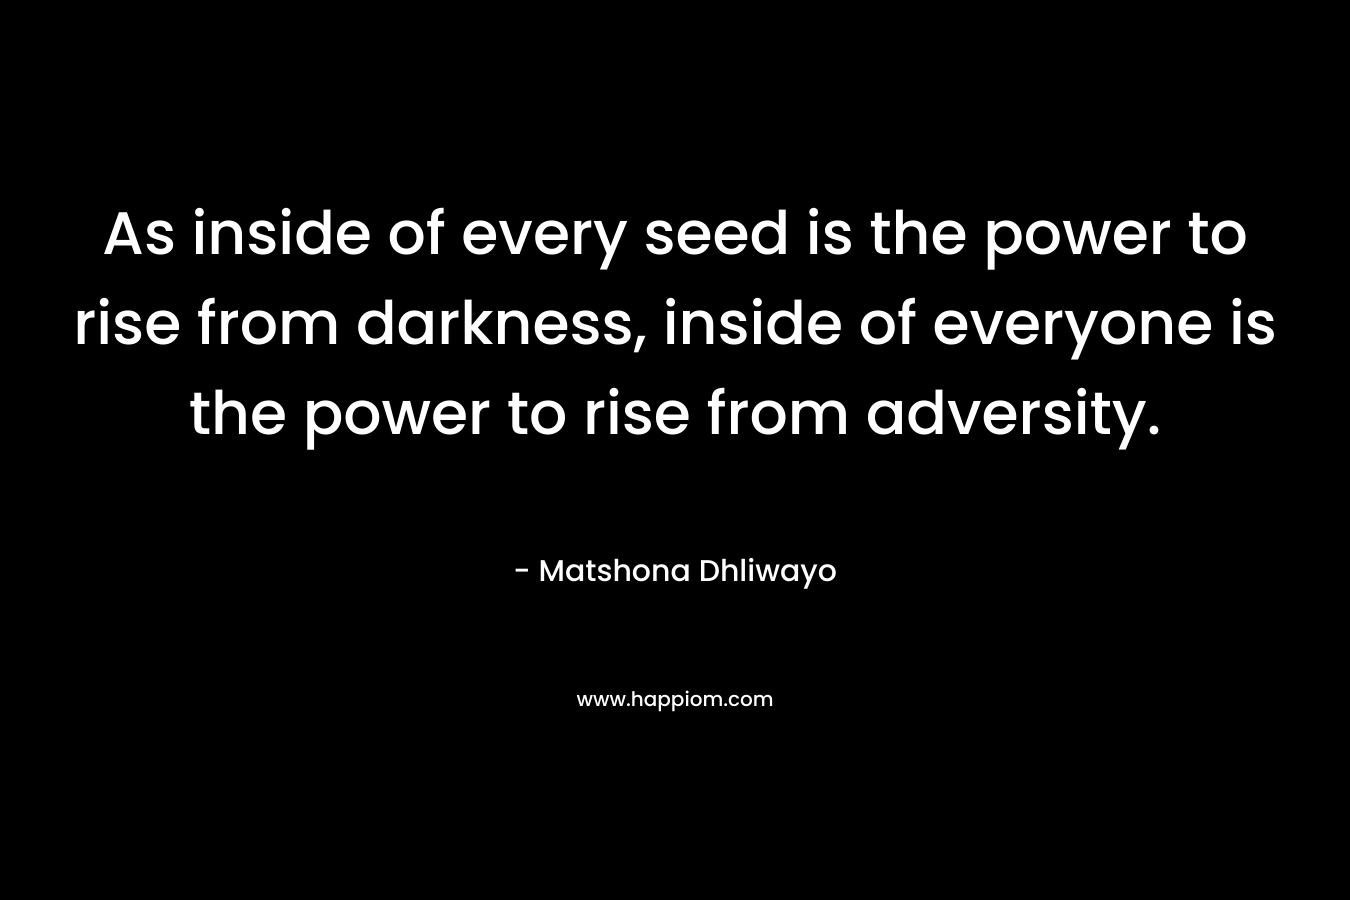 As inside of every seed is the power to rise from darkness, inside of everyone is the power to rise from adversity.